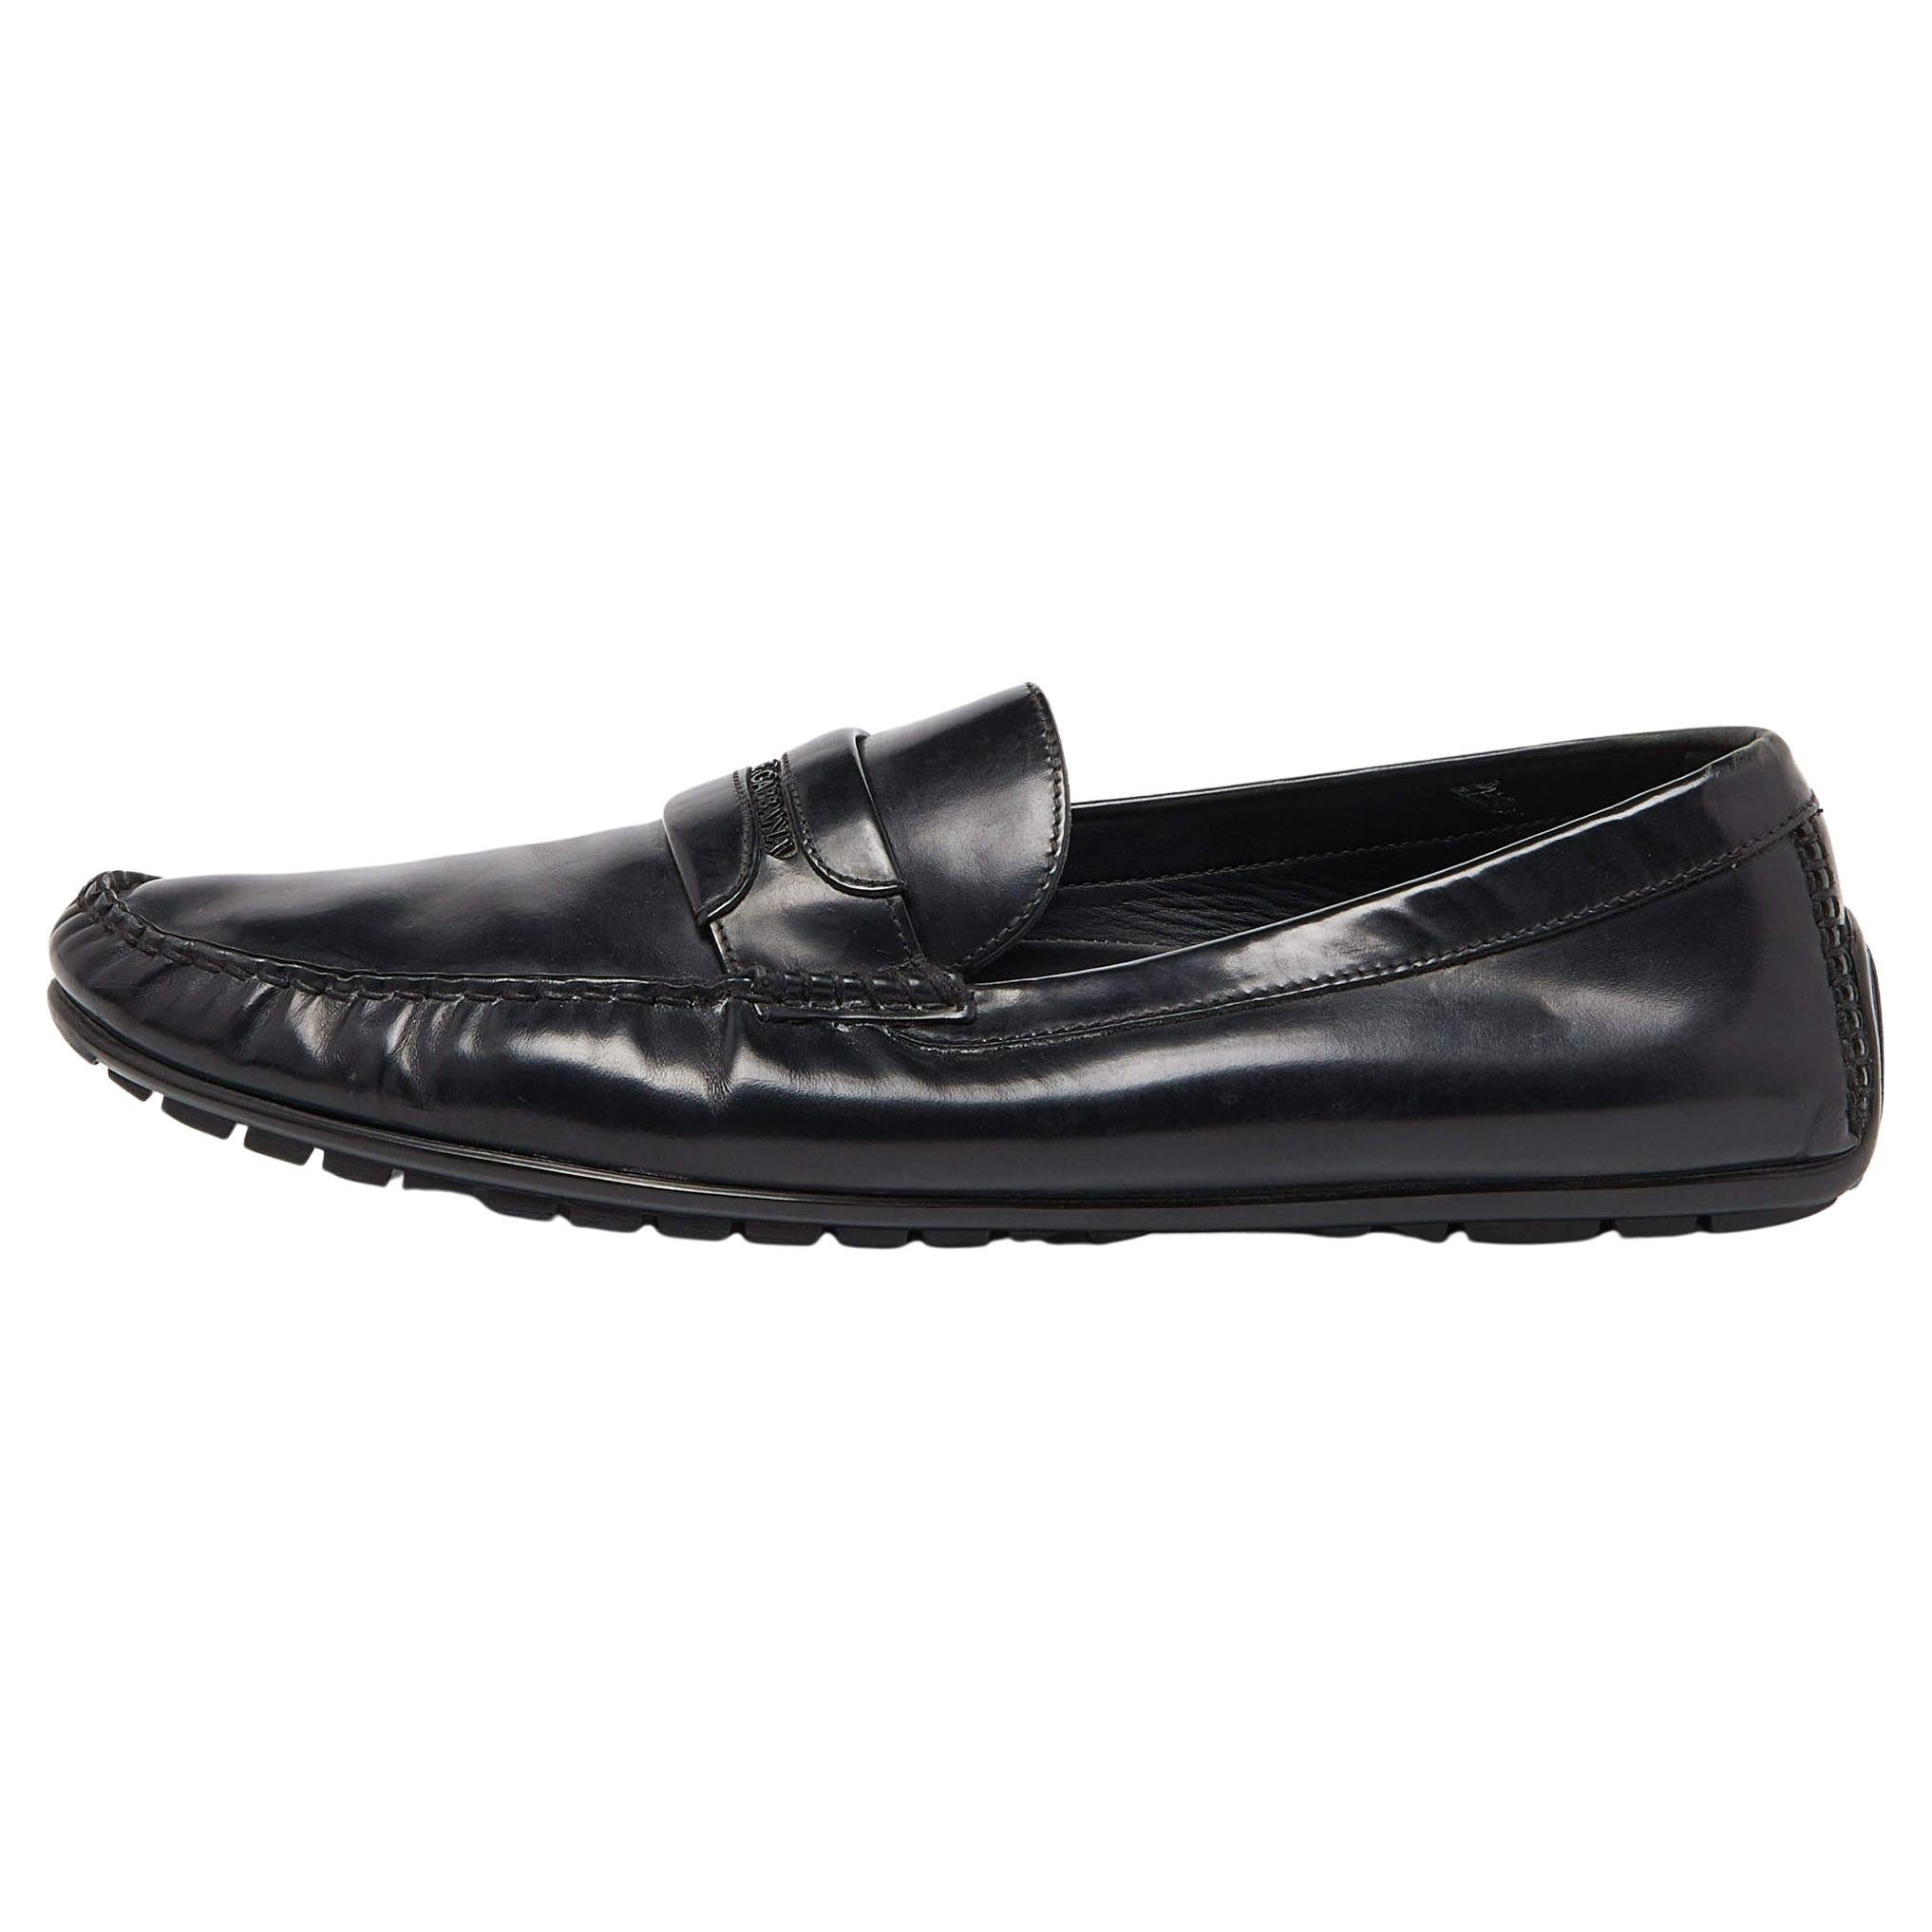 Dolce & Gabbana Black Leather Slip On Loafers Size 44.5 For Sale